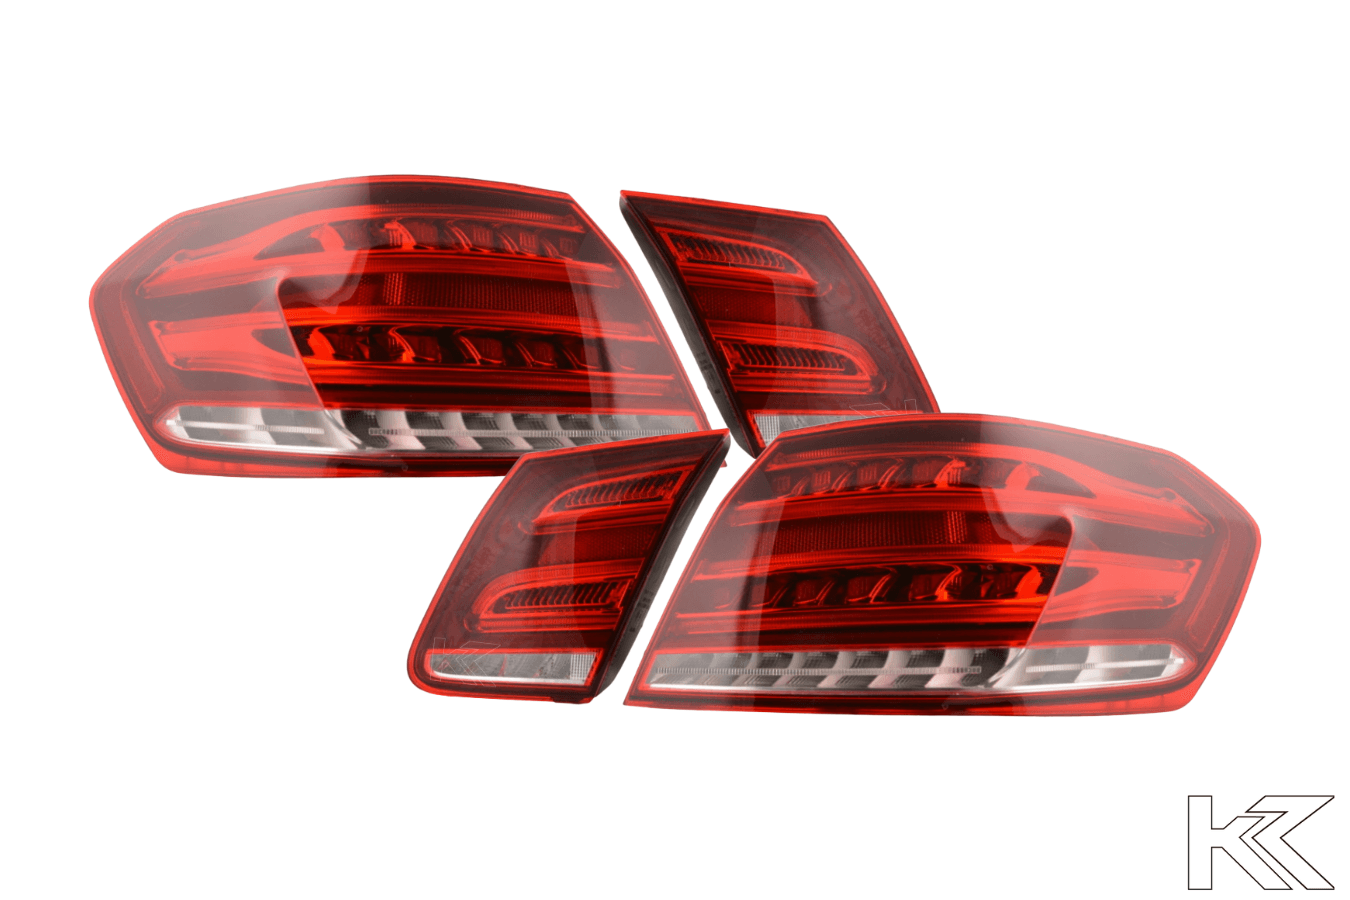 Mercedes Benz E-Class (212) Sedan Red, OE Style LED Taillights Set (2013-2016) - K2 Industries